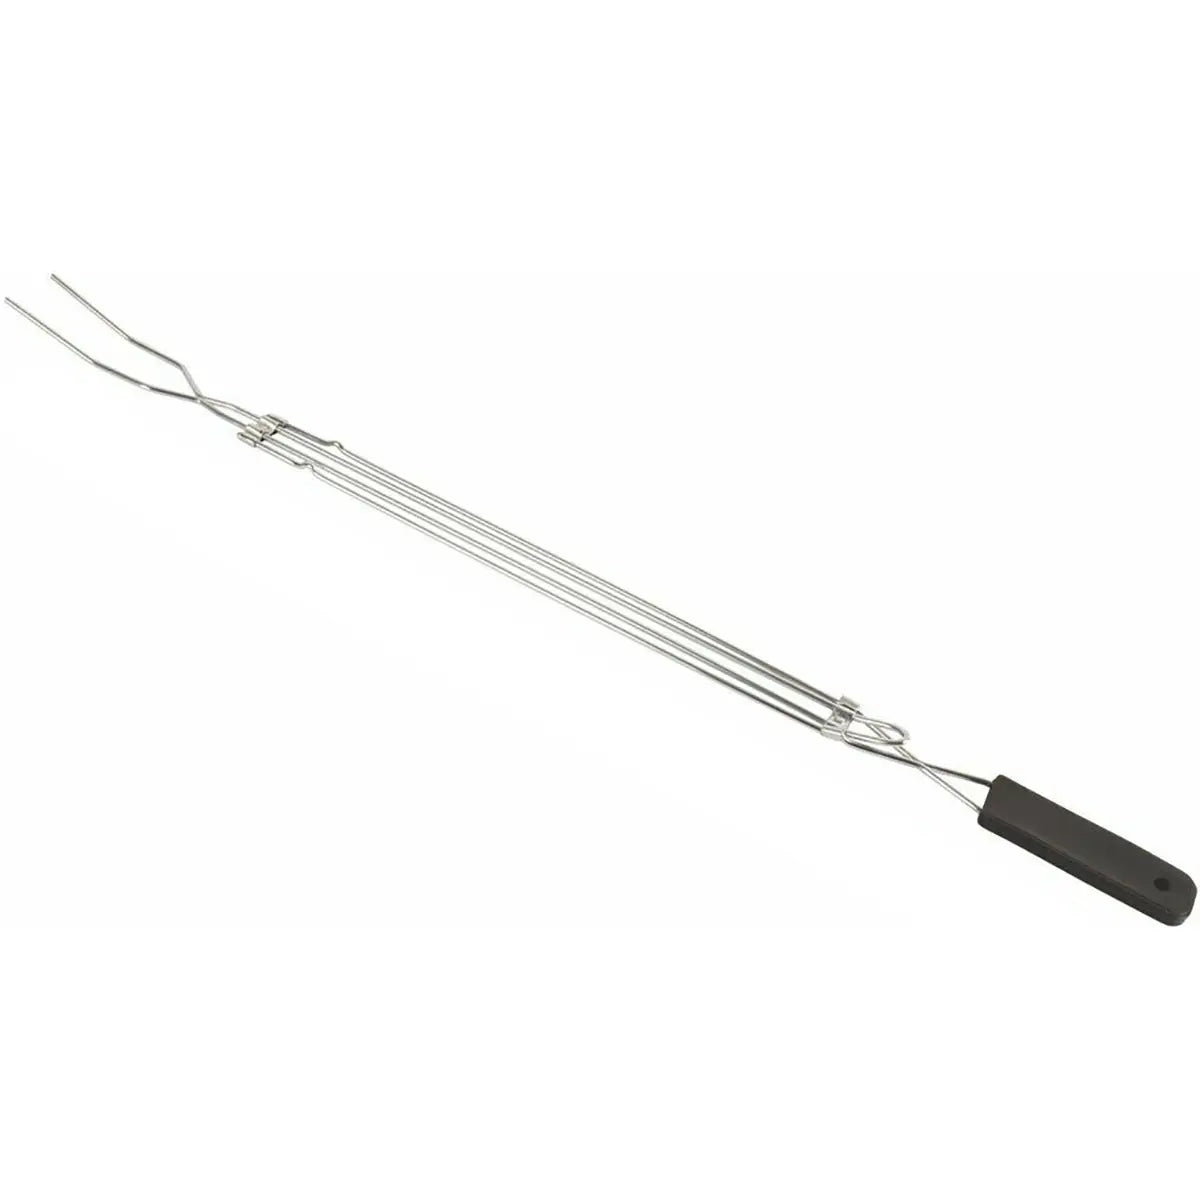 Coghlan's Extension Fork, Telescoping Handle Extends to 30", For Camping Cooking Coghlan's